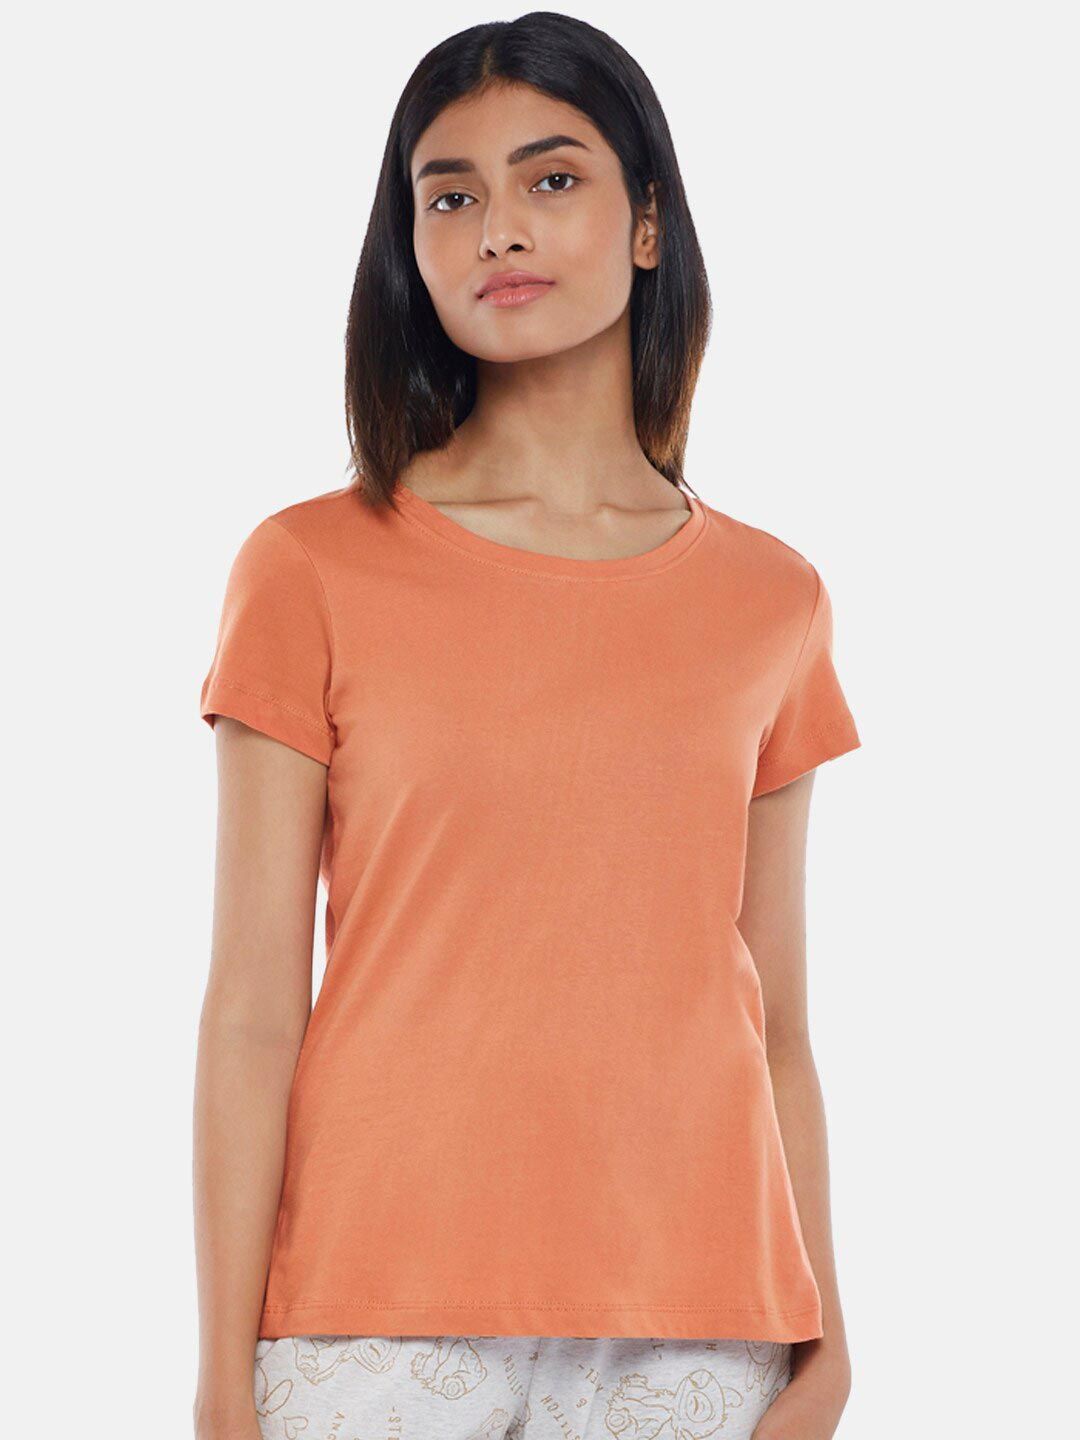 Dreamz by Pantaloons Women Rust Pure Cotton Lounge T-shirt Price in India